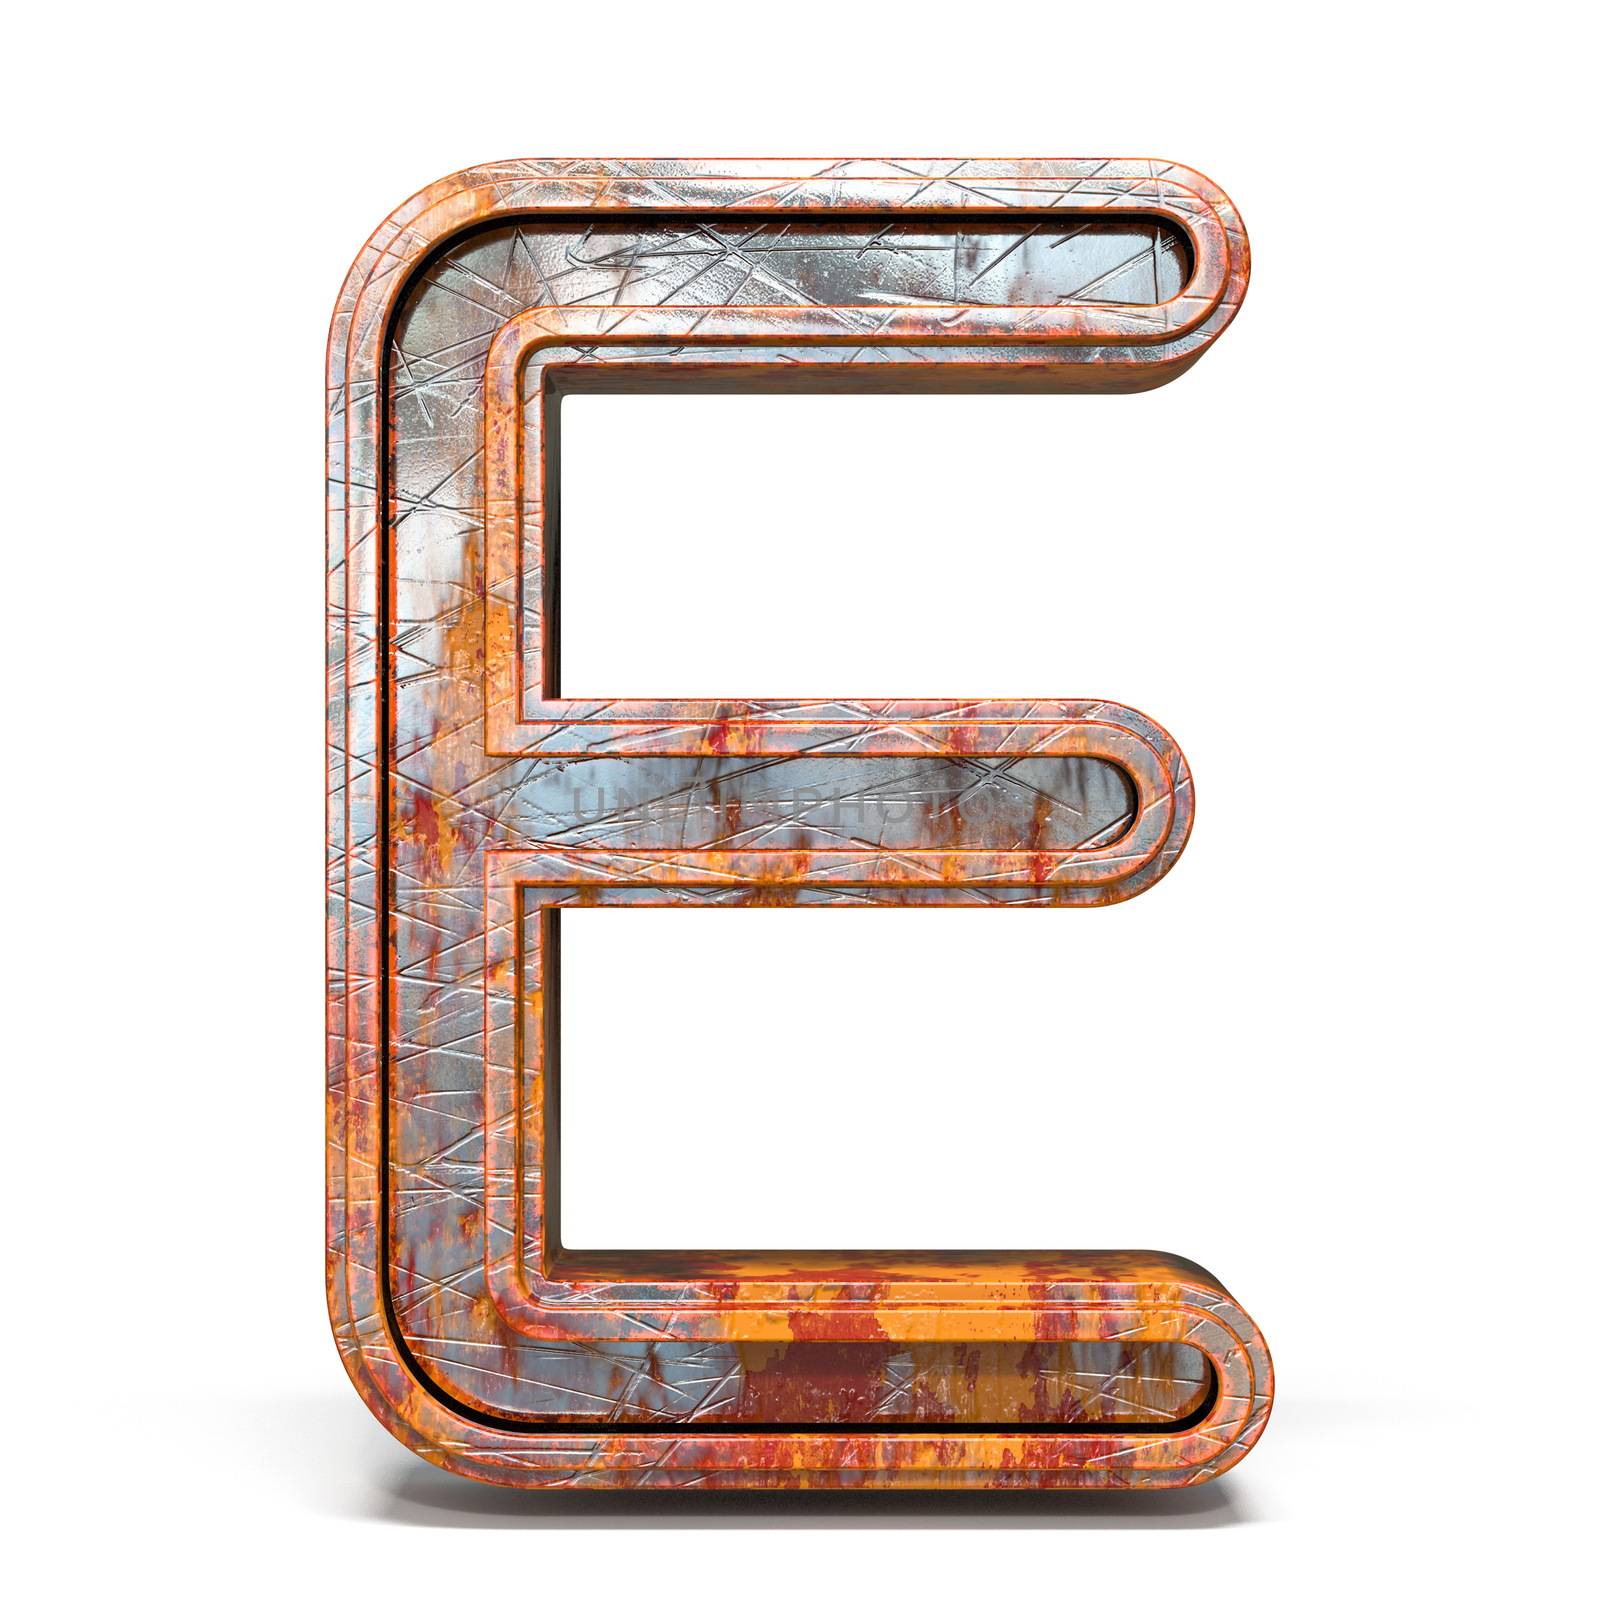 Rusty metal font Letter E 3D render illustration isolated on white background